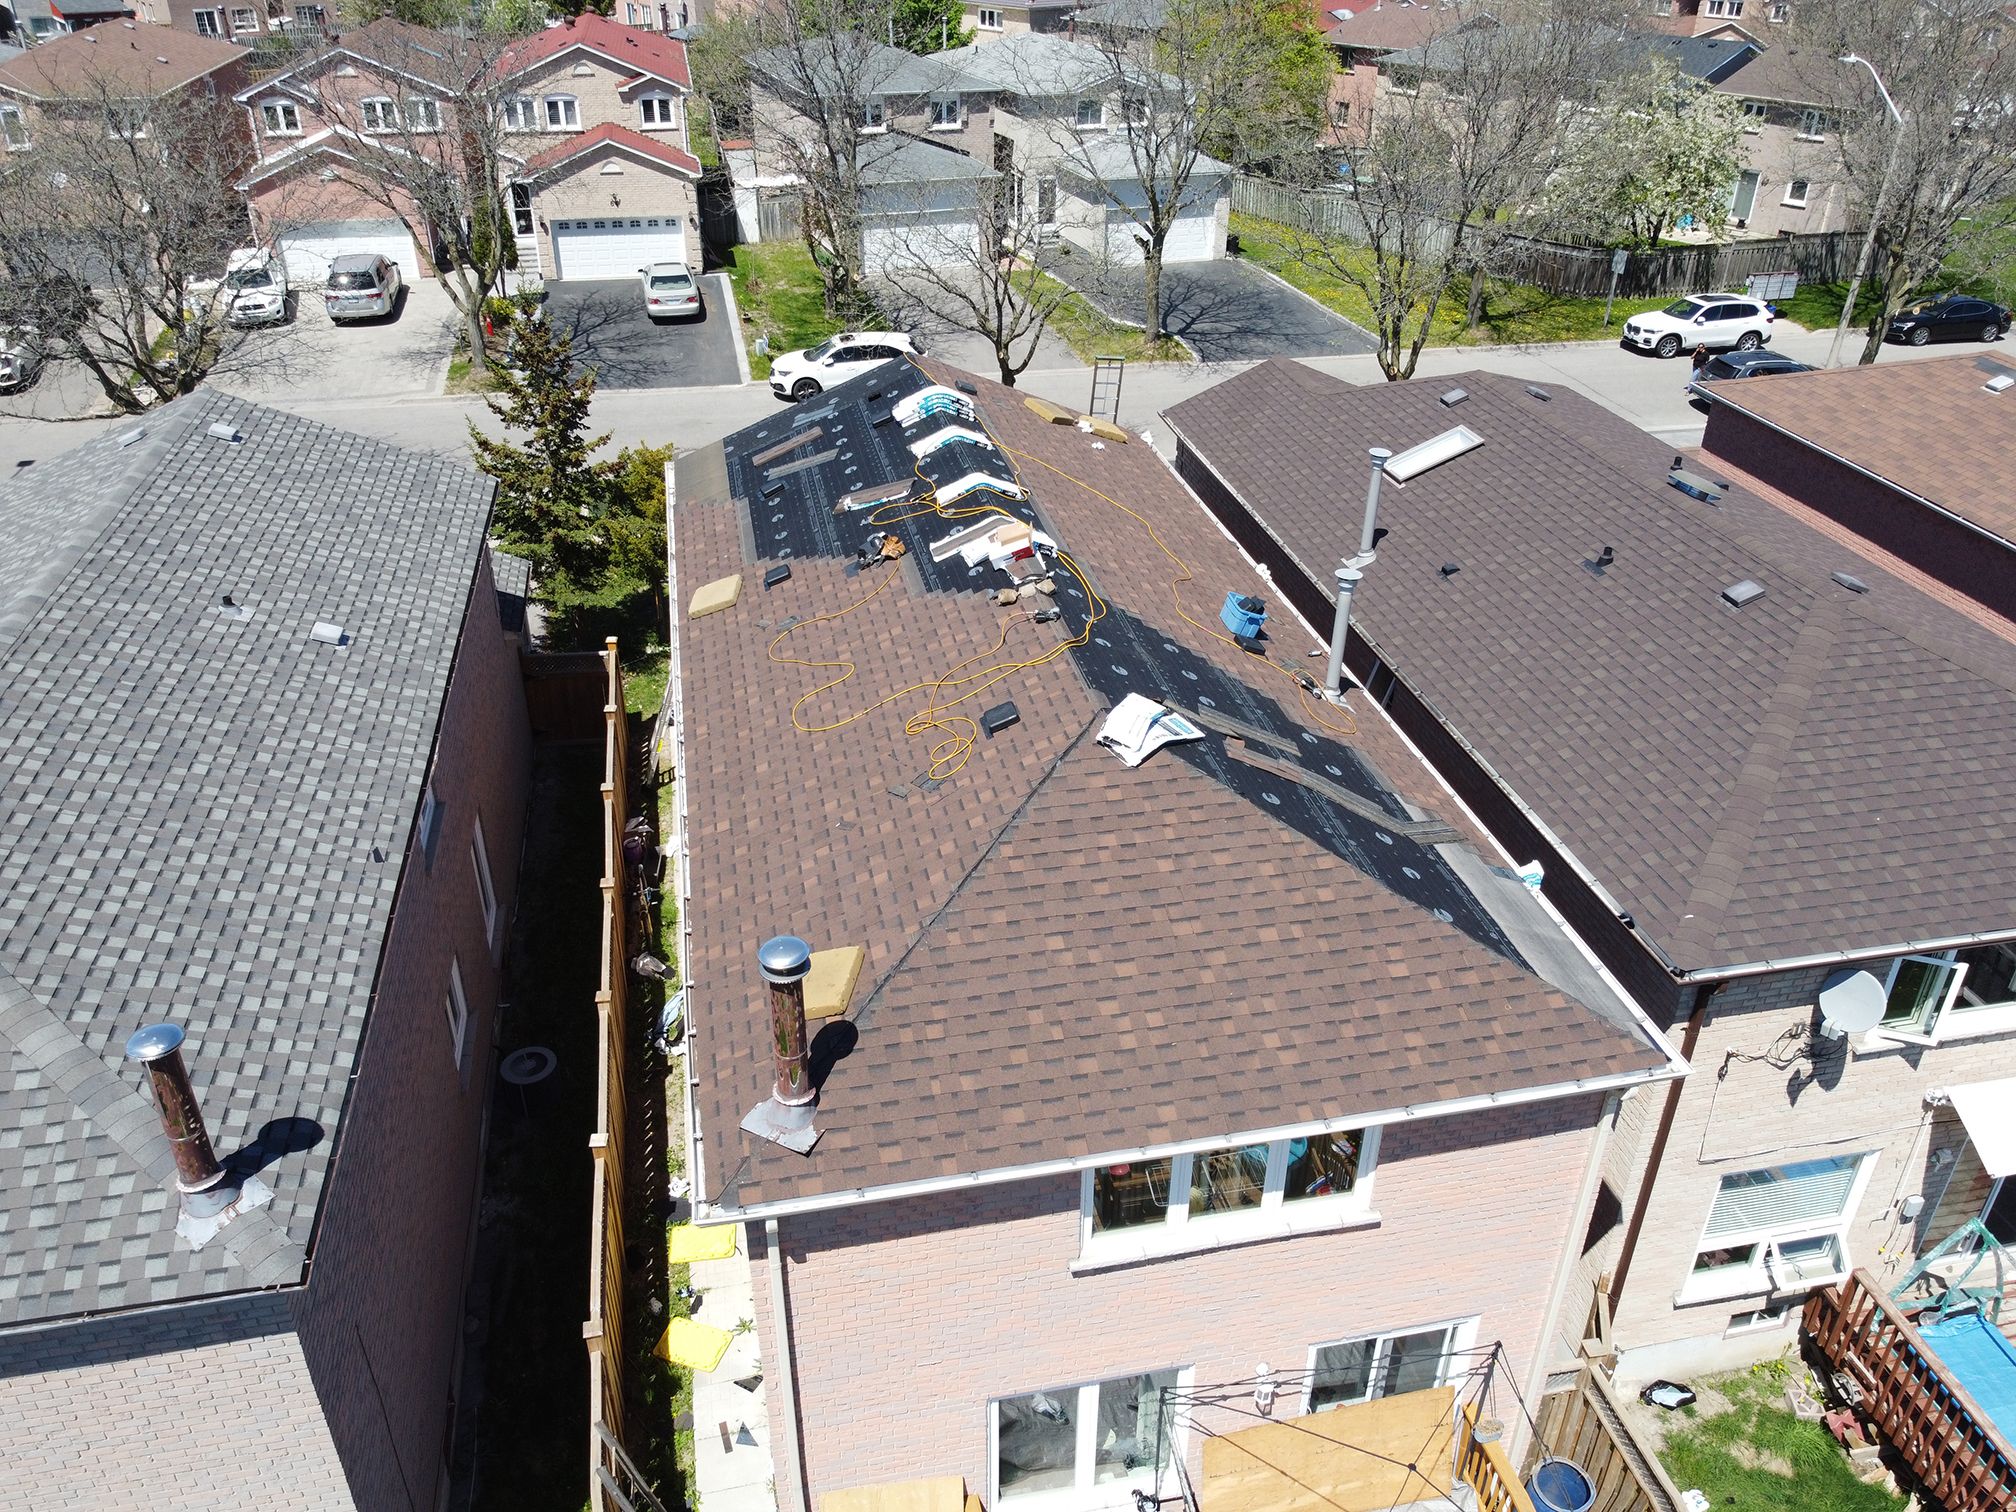 Markham Roof Replacement Project